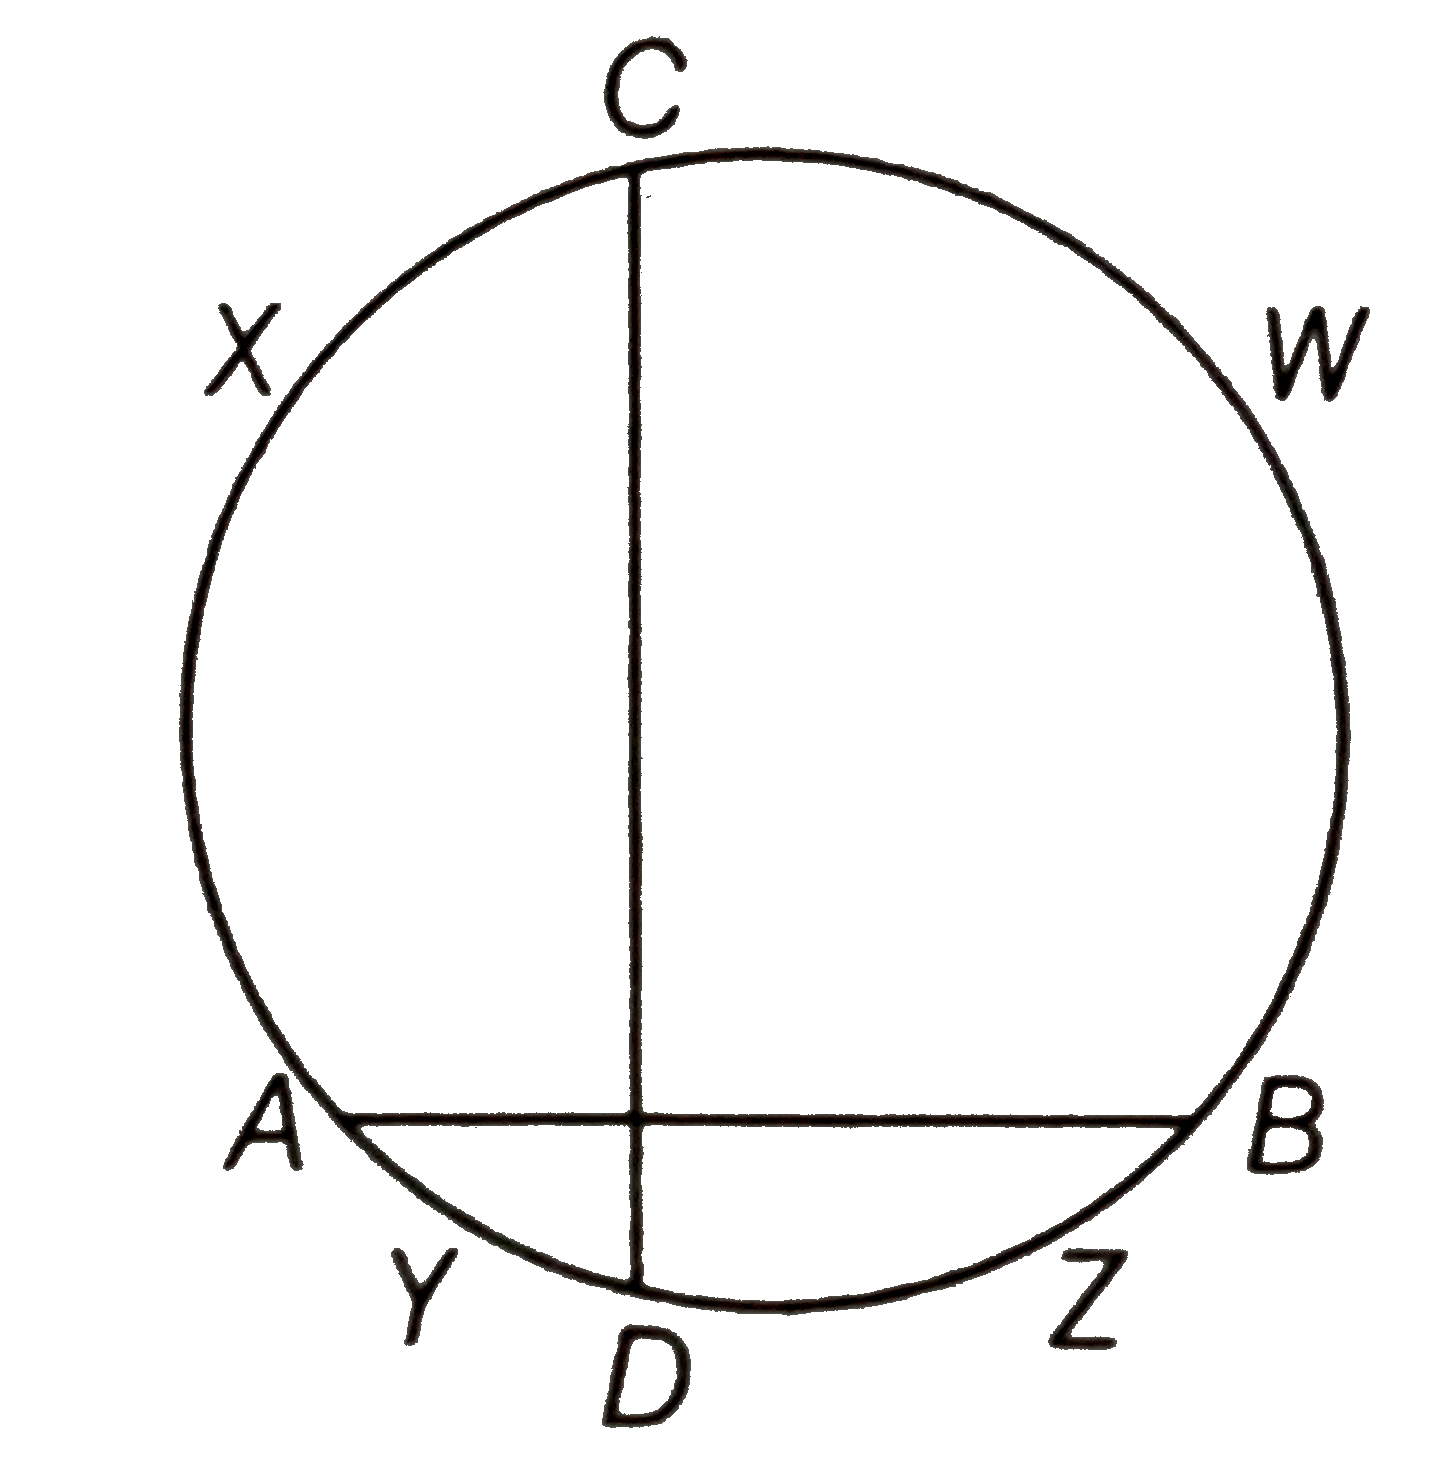 If two chords AB and CD of a circle AYDZBWCX intersect at right angles,  then prove that arc CXA+arc DZB=arc AYD+arc BWC =semi-circle.